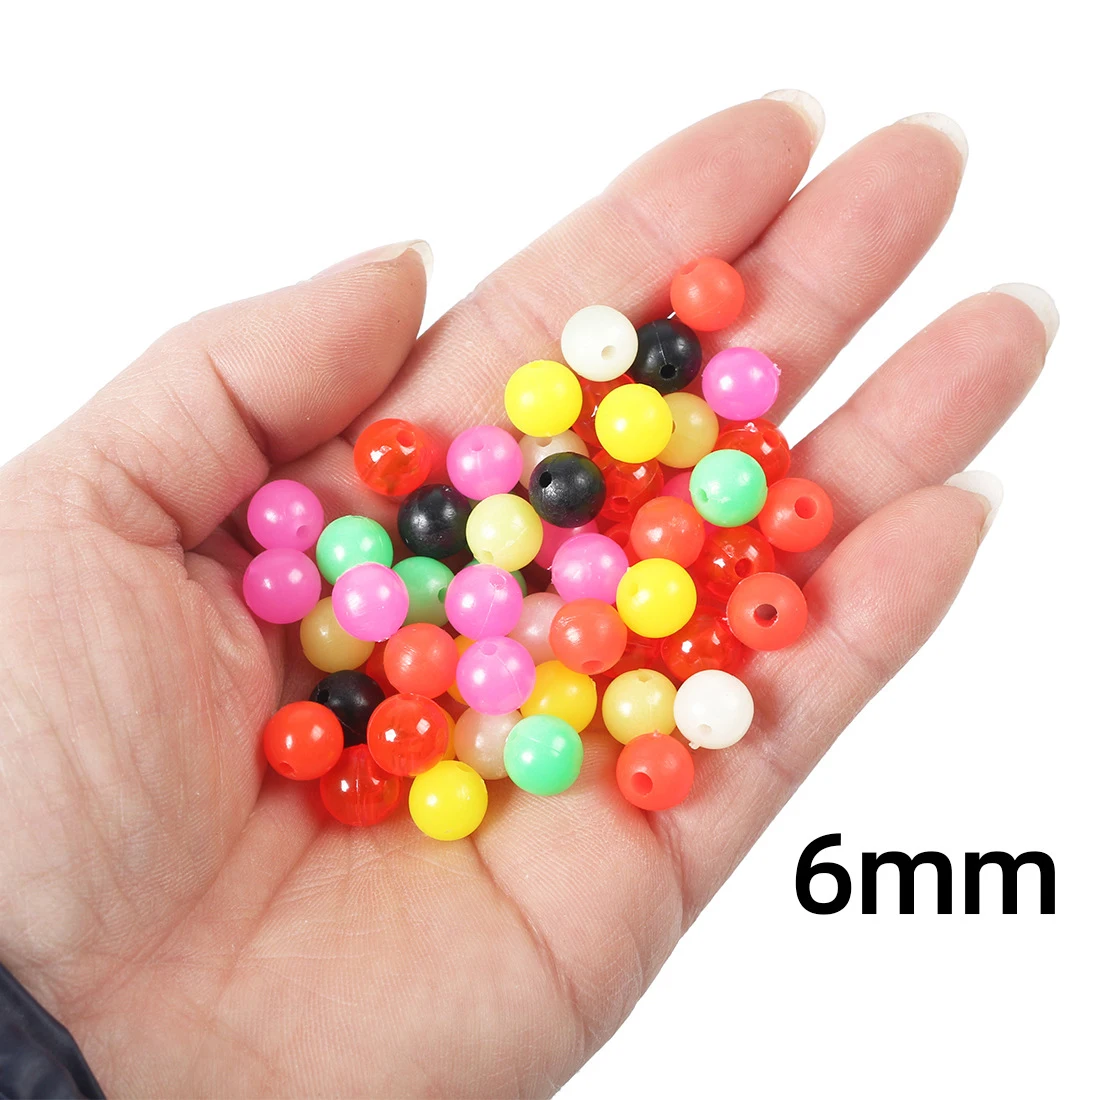 100PCS/lot Mixed Color Fishing Beads Hard Plastic Round Floating Fishing  Beads Diameter 4mm/5mm/6mm/7mm/8mm